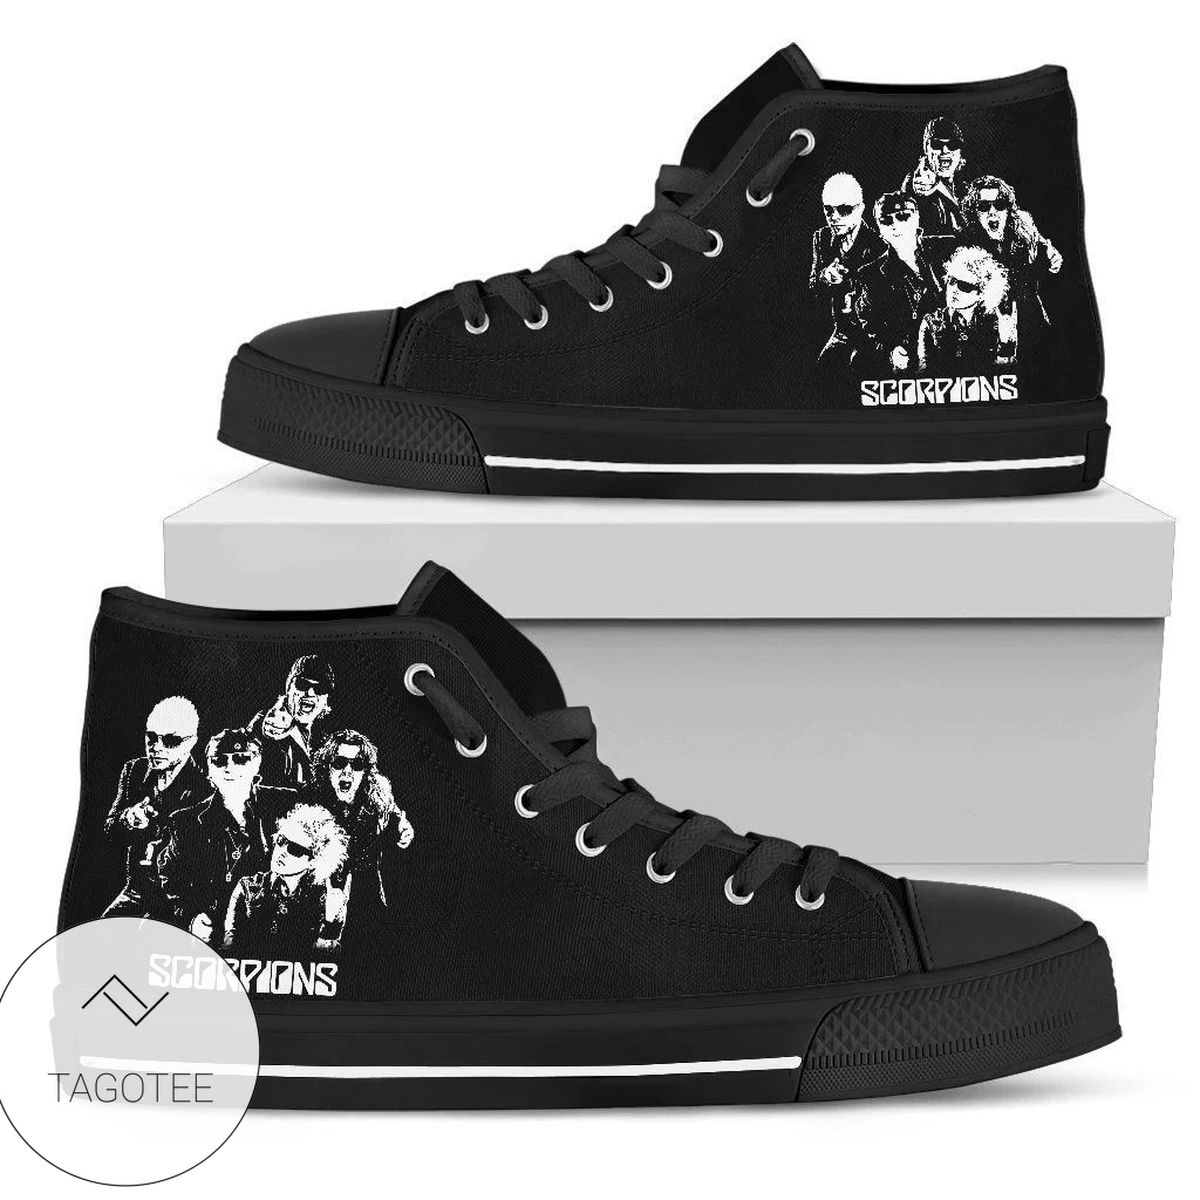 Scorpions Band Sneakers High Top Shoes For Music High Top Shoes